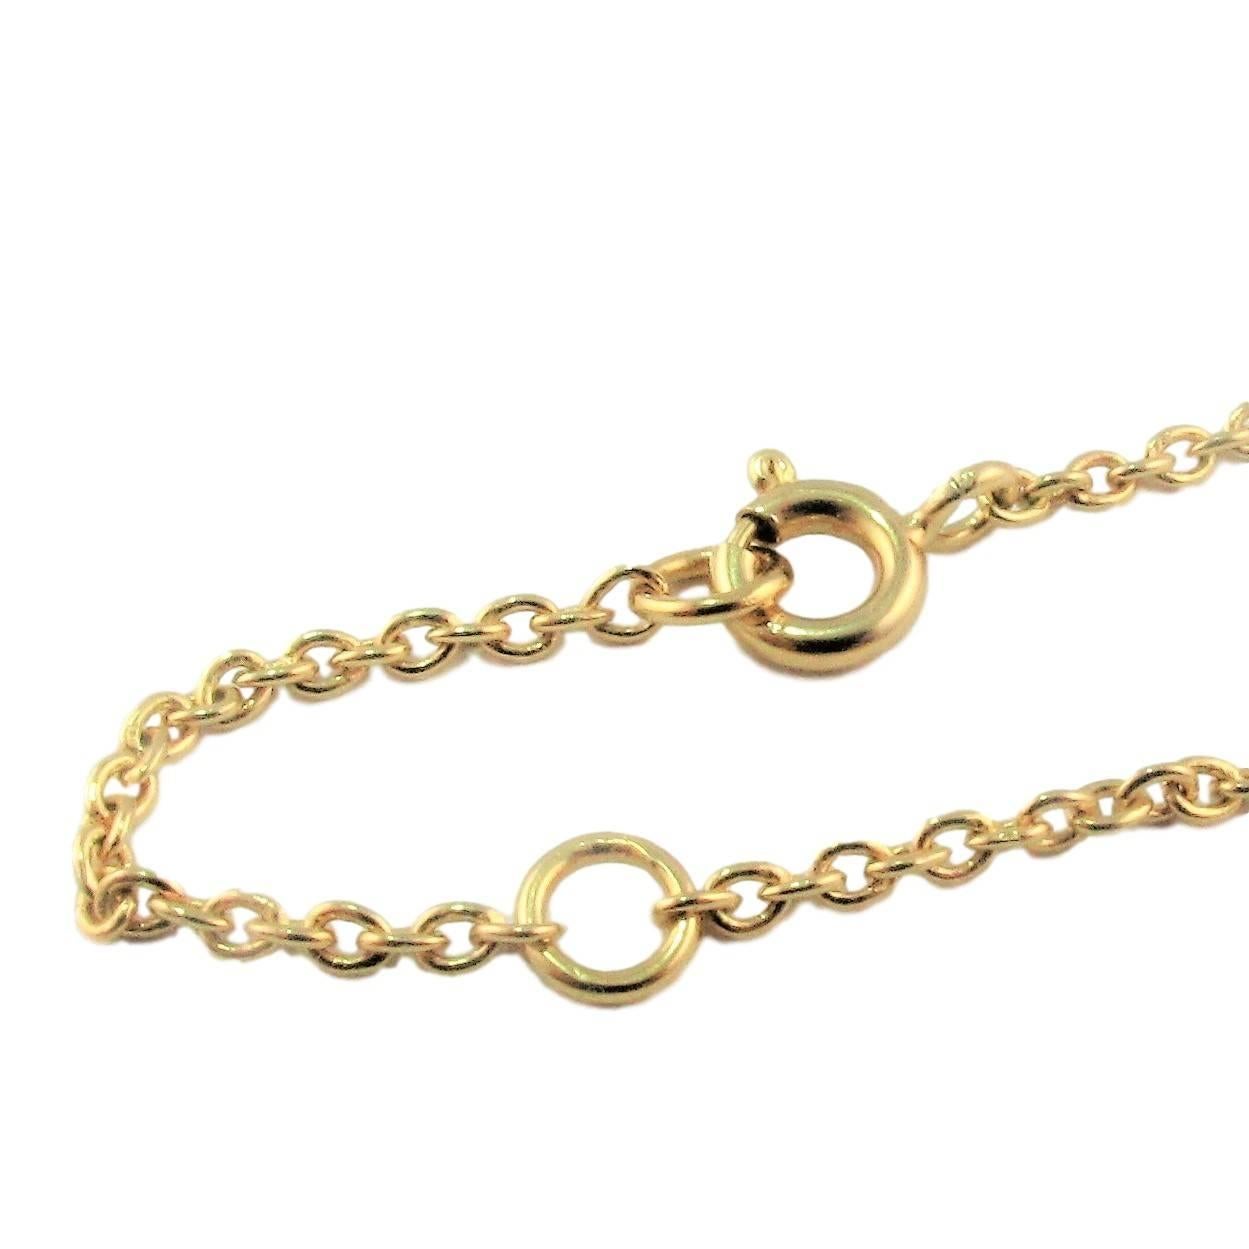 Performance Art : DIAMONDS IN LOVE on PLANET LOVE Yellow Gold Plated  Bracelet  For Sale 3